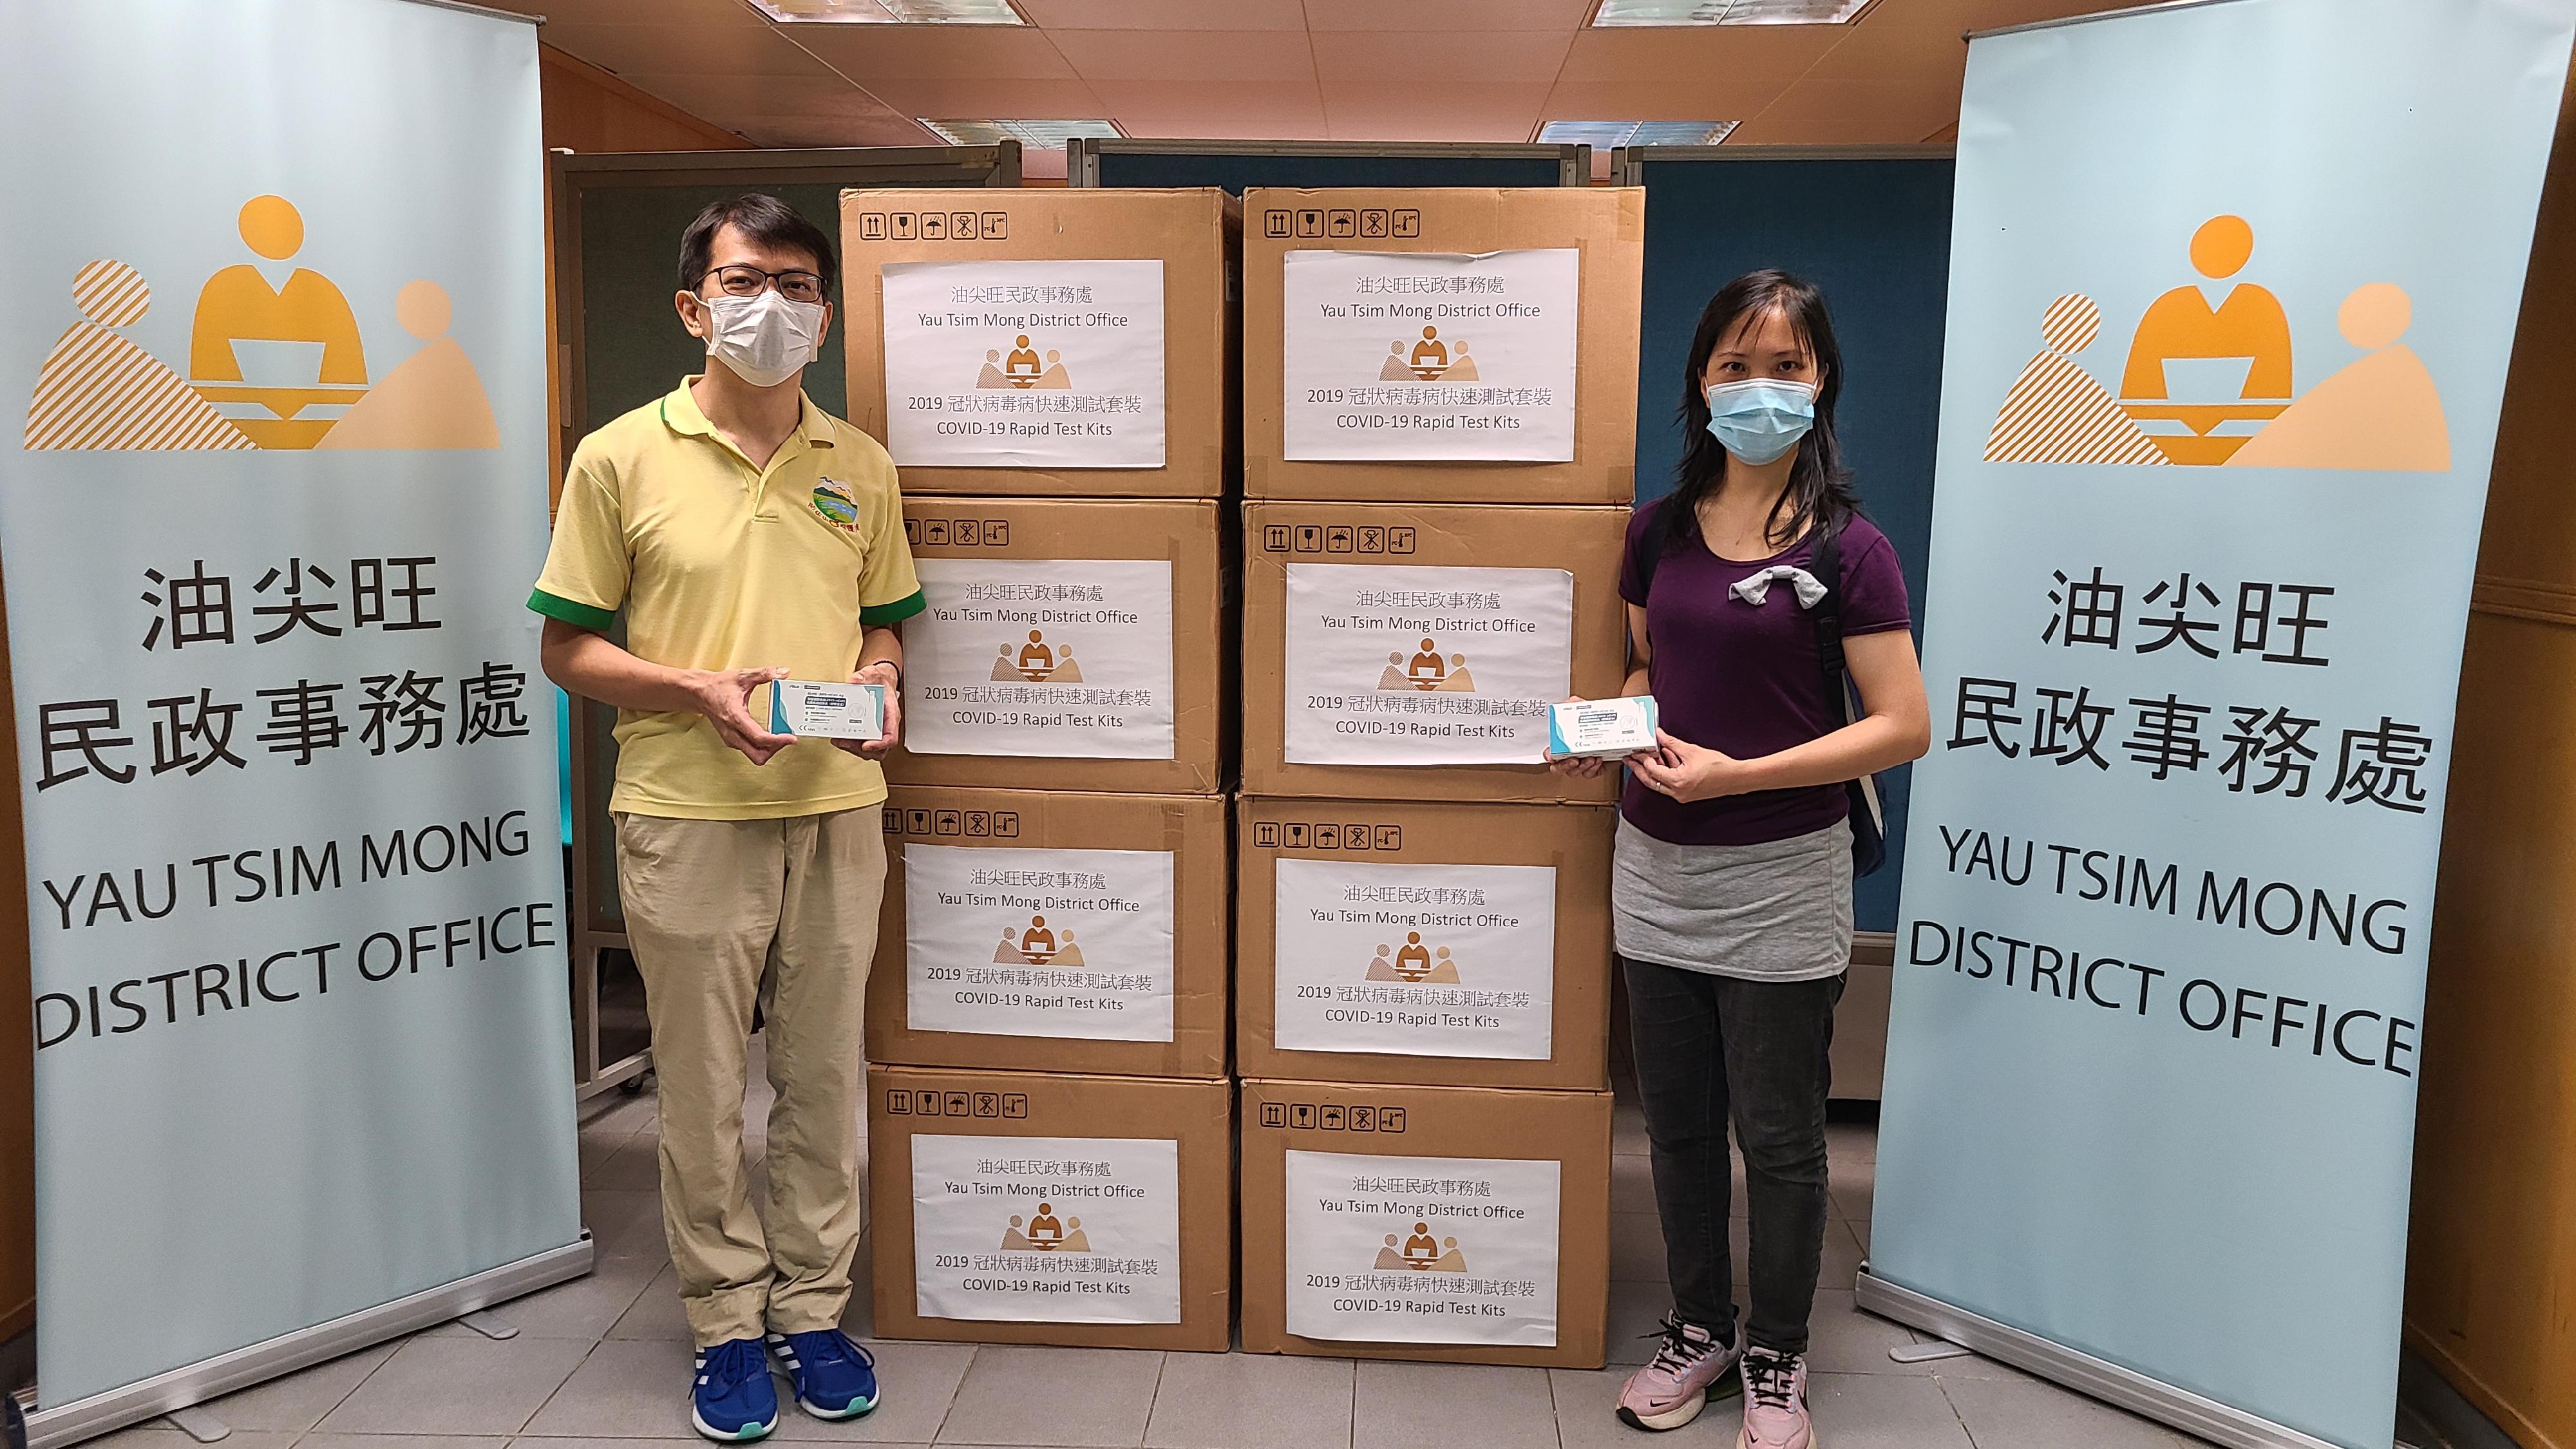 The Yau Tsim Mong District Office today (July 18) distributed COVID-19 rapid test kits to households, cleansing workers and property management staff living and working in Kam Lai Court for voluntary testing through the property management company.